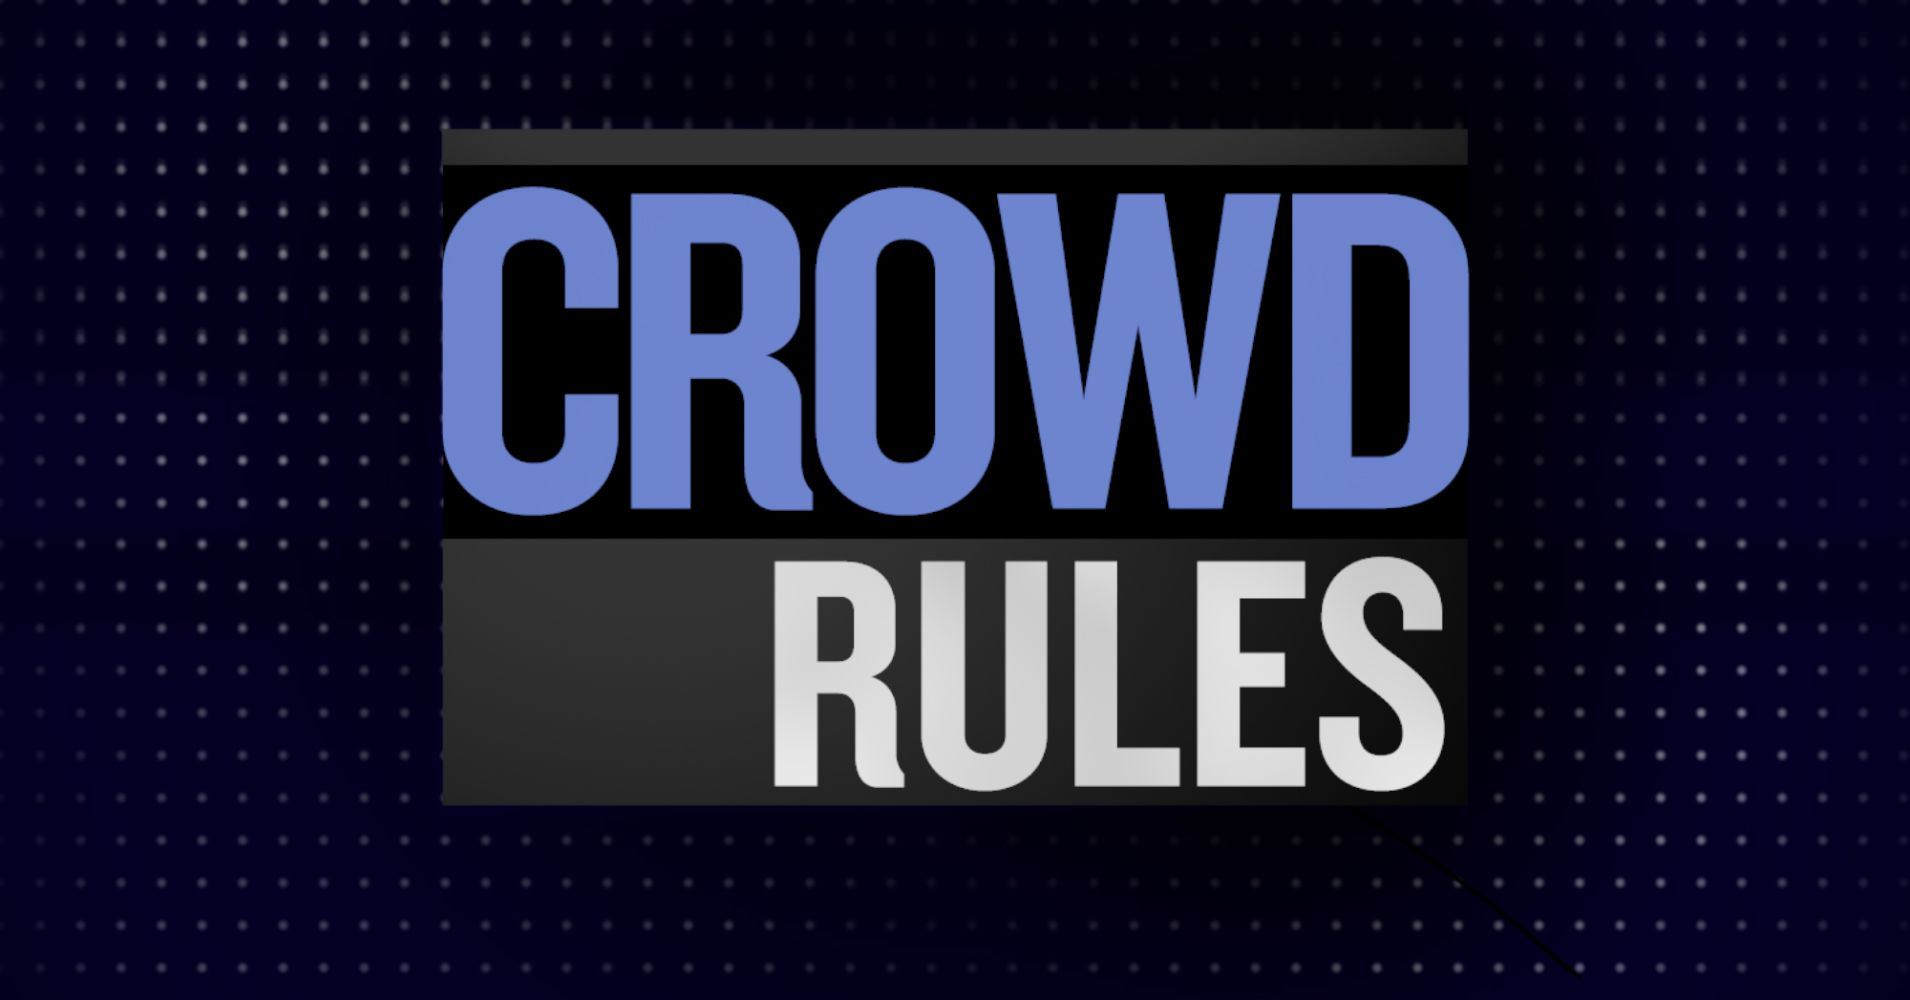 Crowd Rules